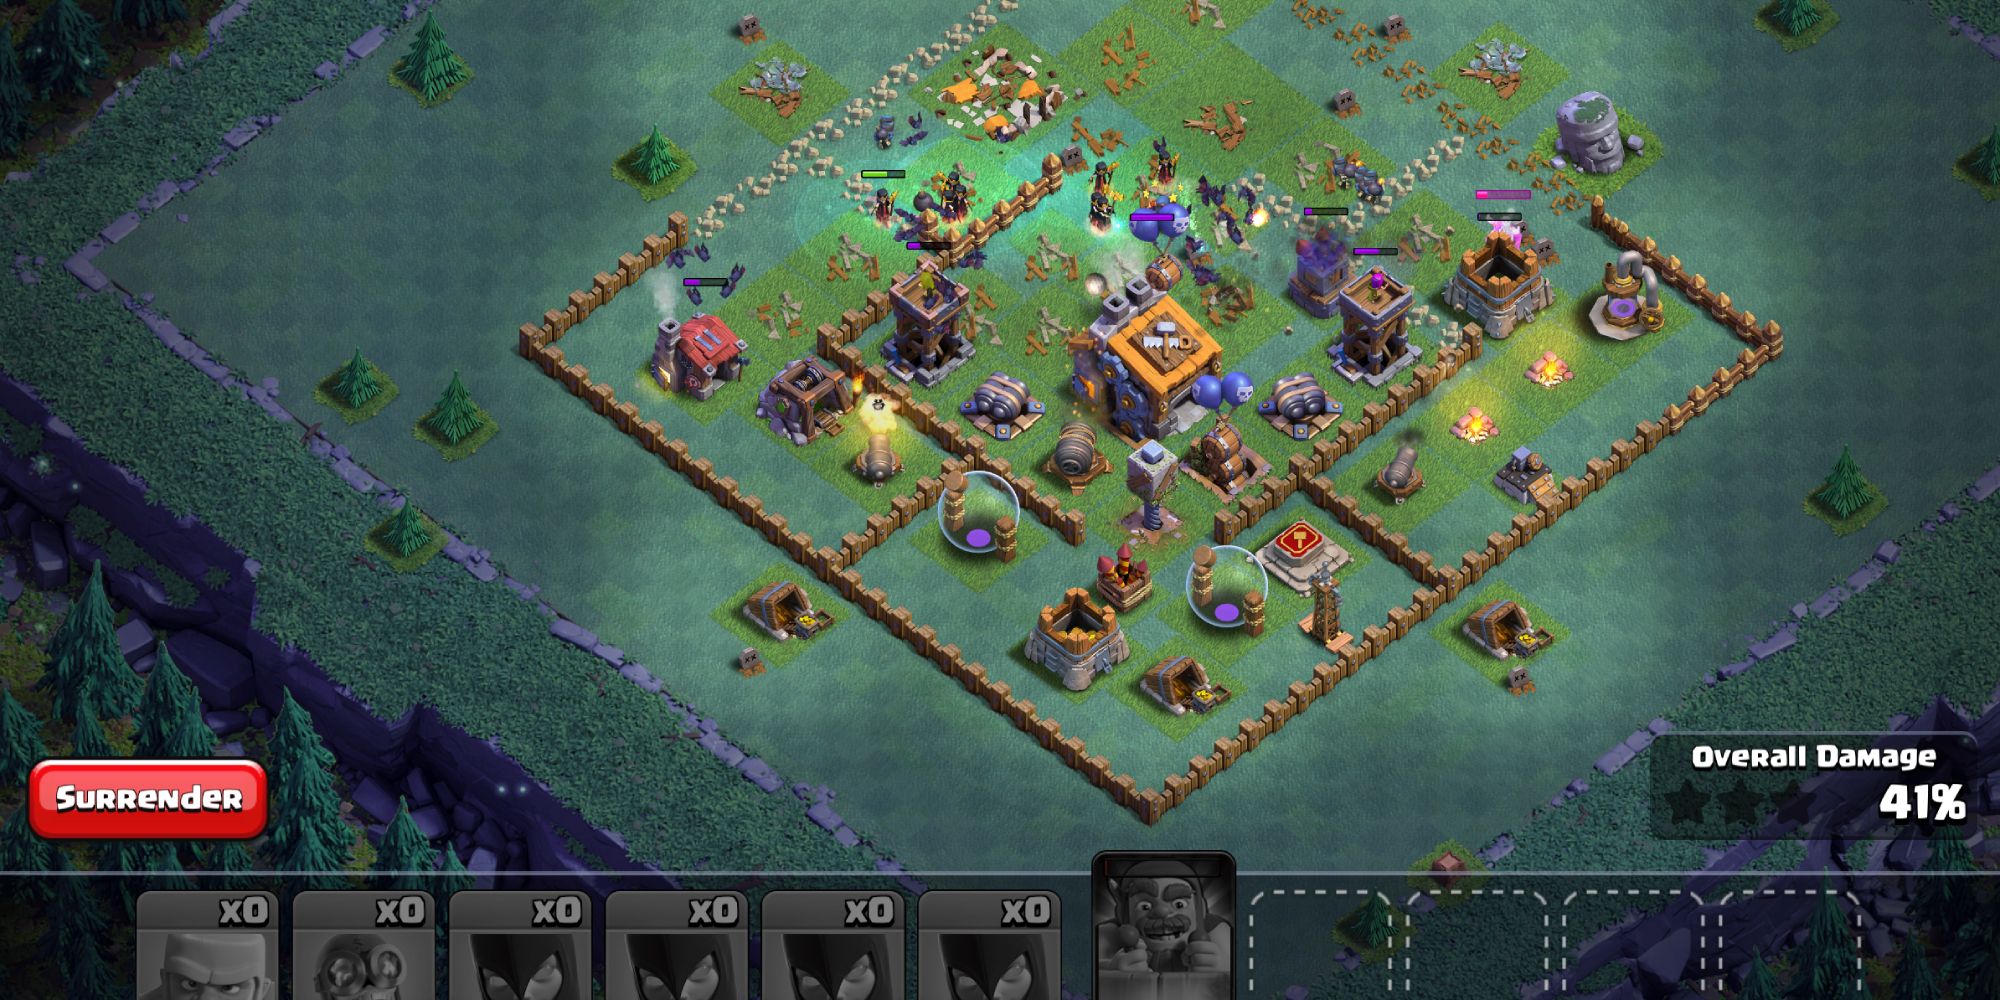 Clash of Clans builder-based multiplayer combat is in full swing as Witch of the Night destroys everything